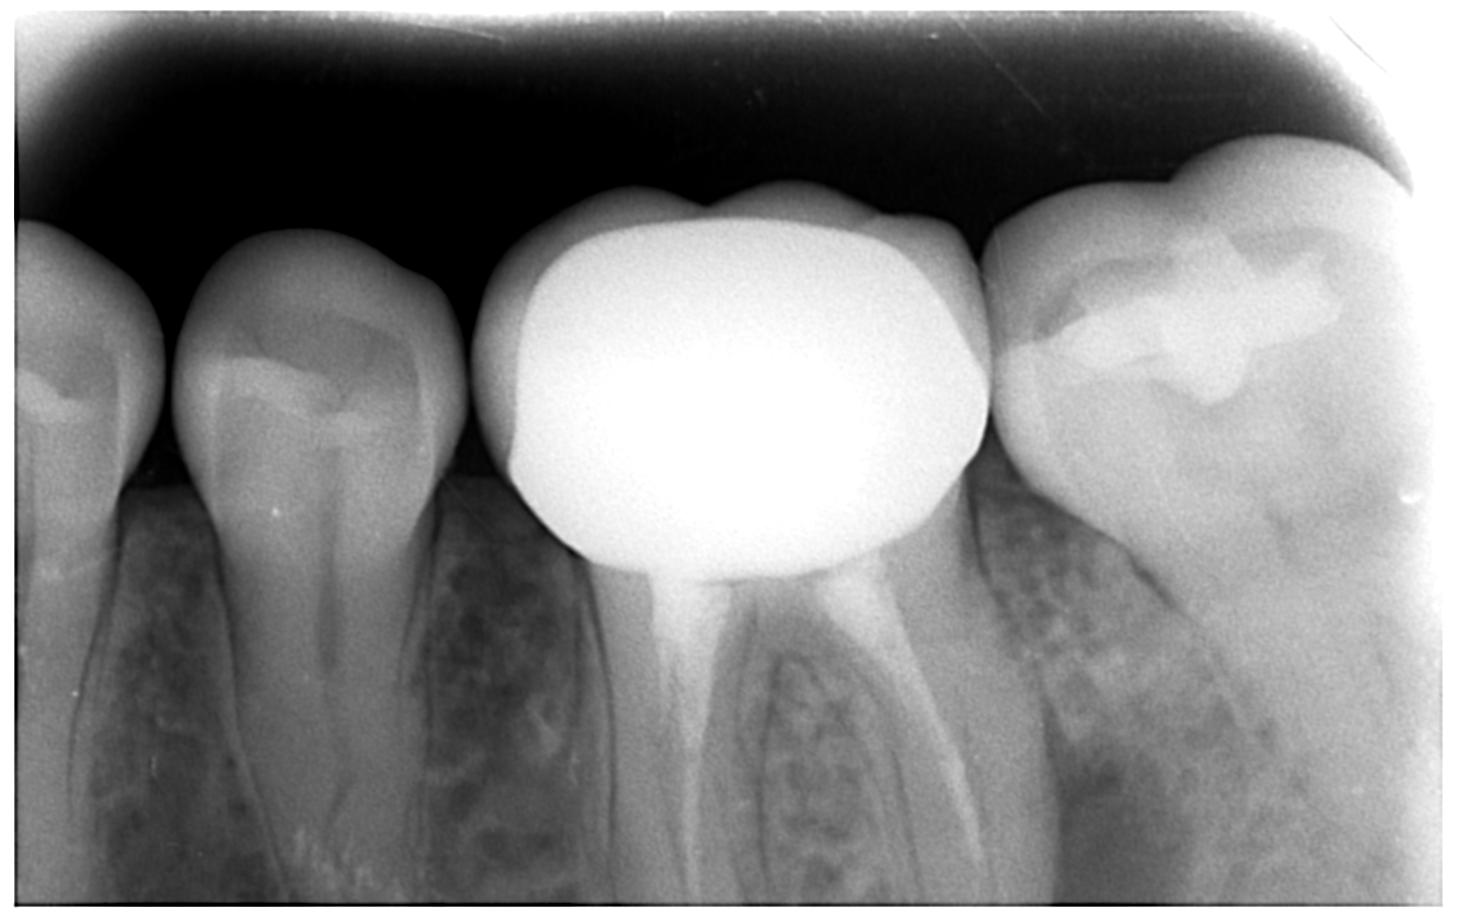 Lateral periapical lesion . What is the prognosis ?